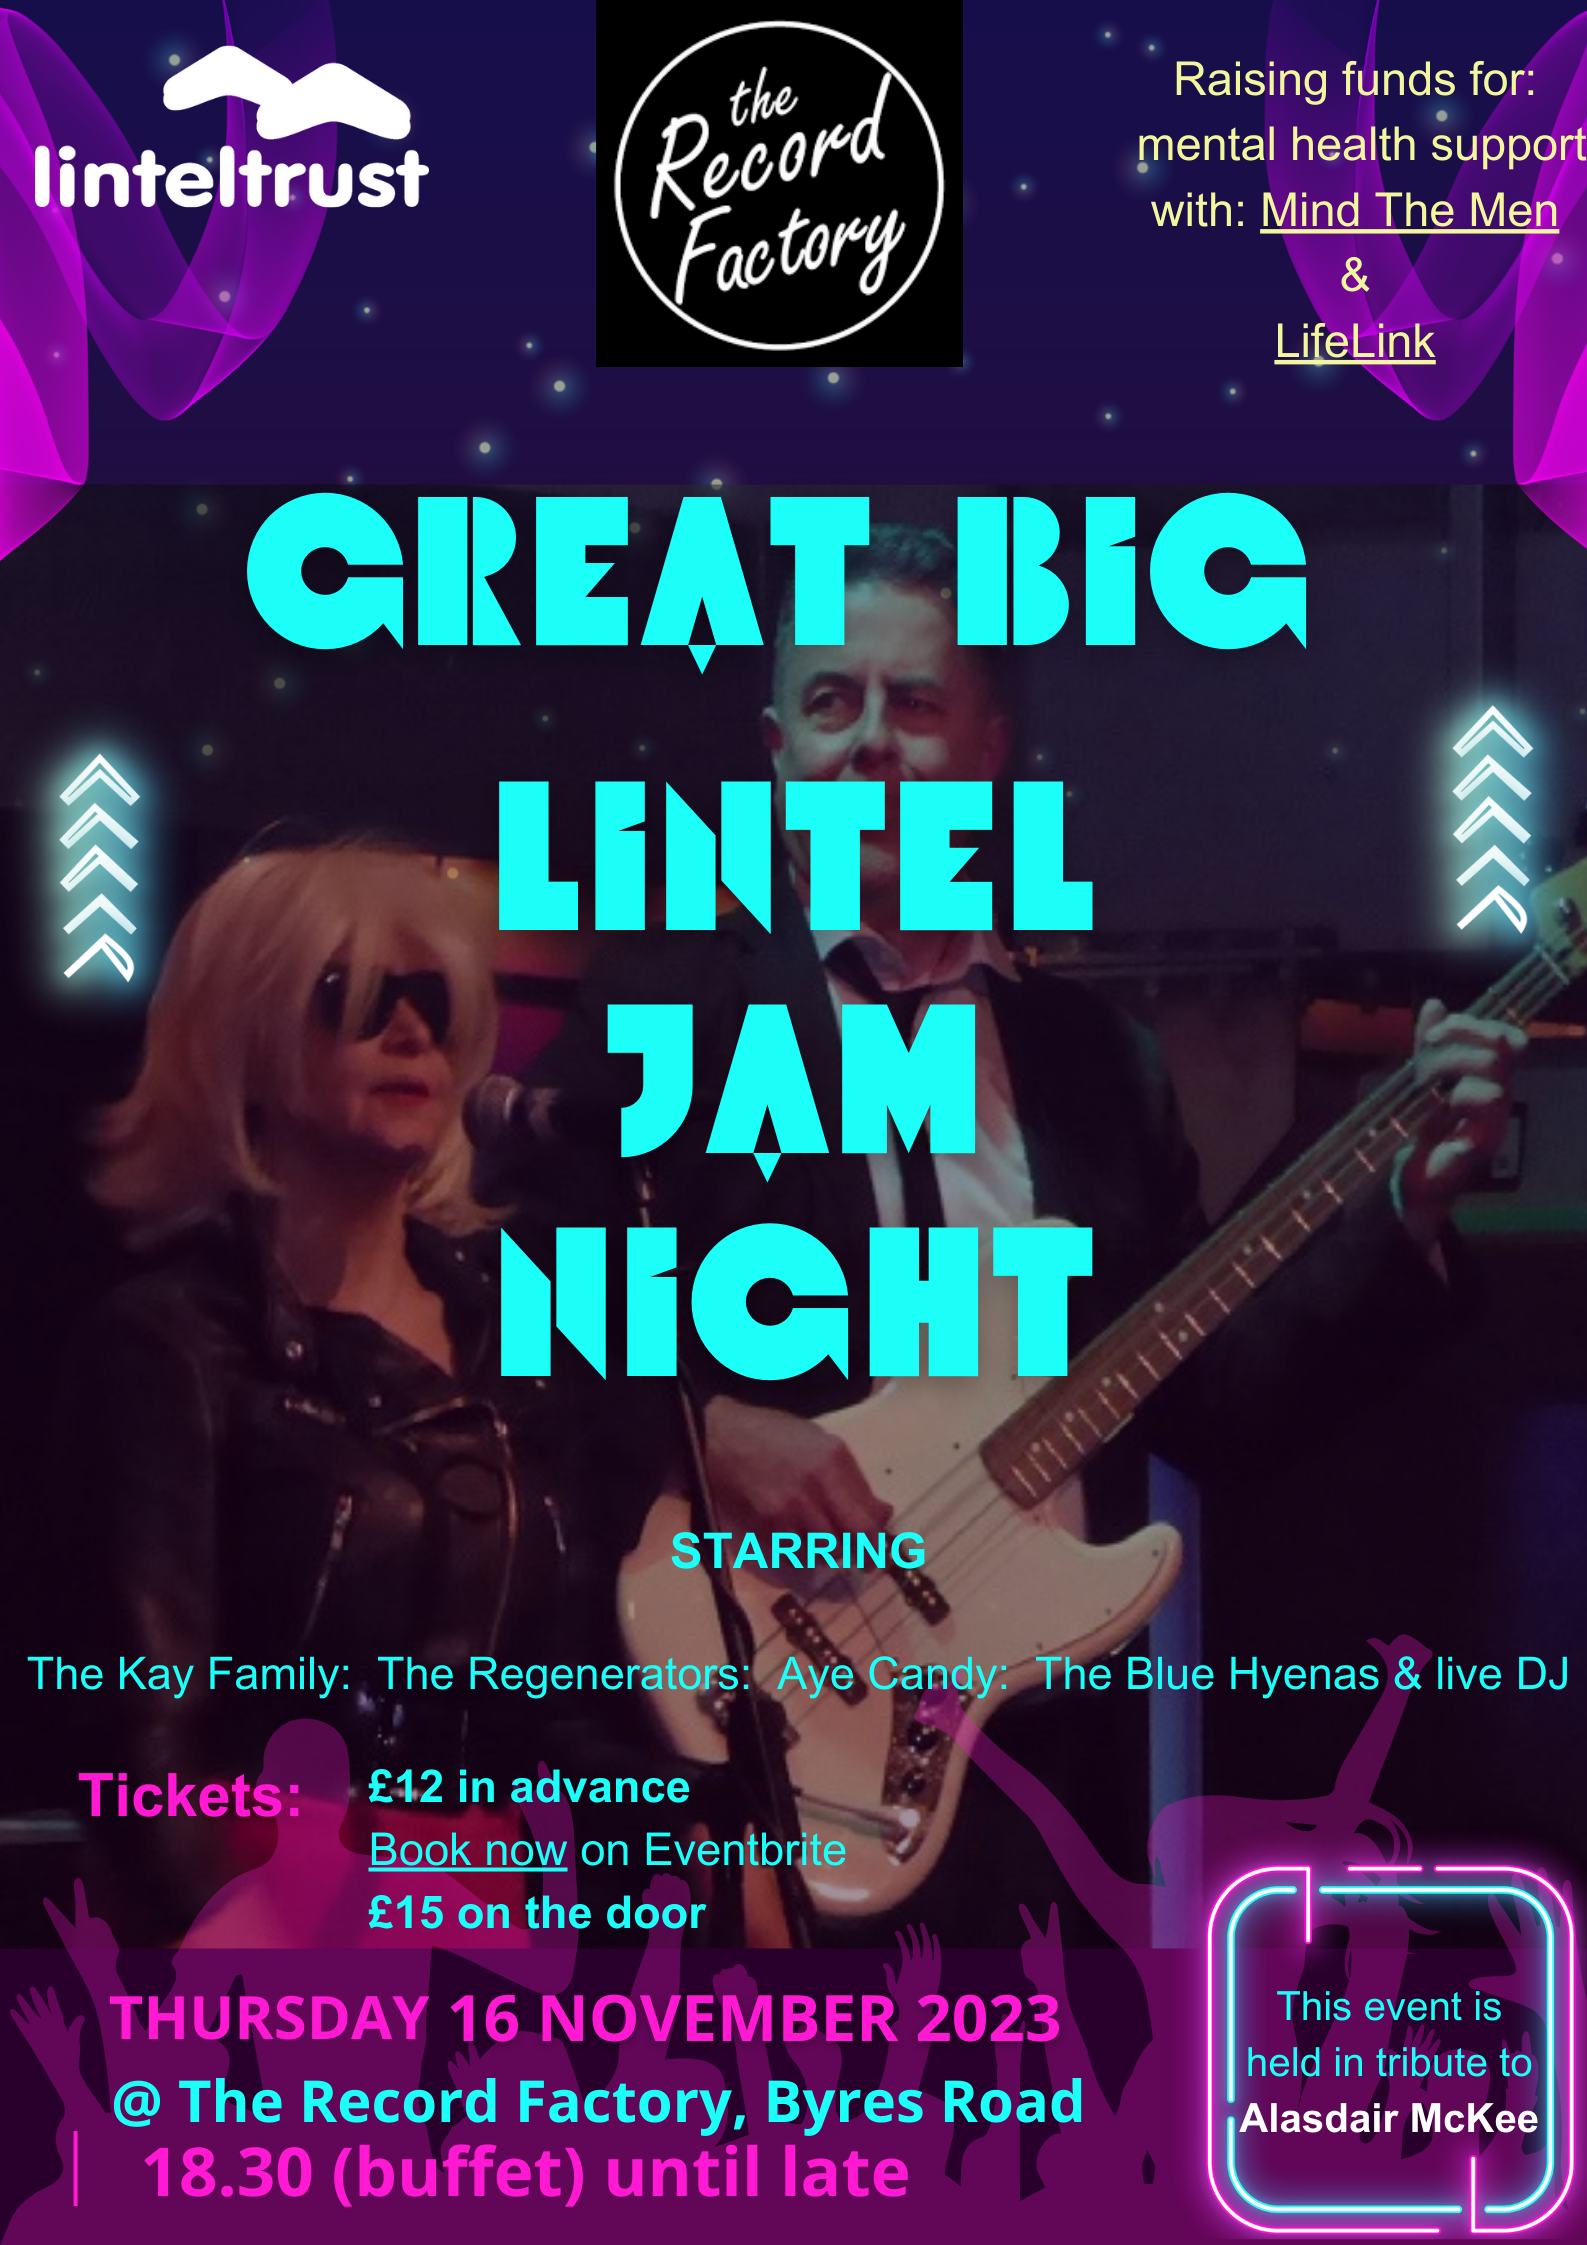 Great Big Lintel Jam Night to take place this evening